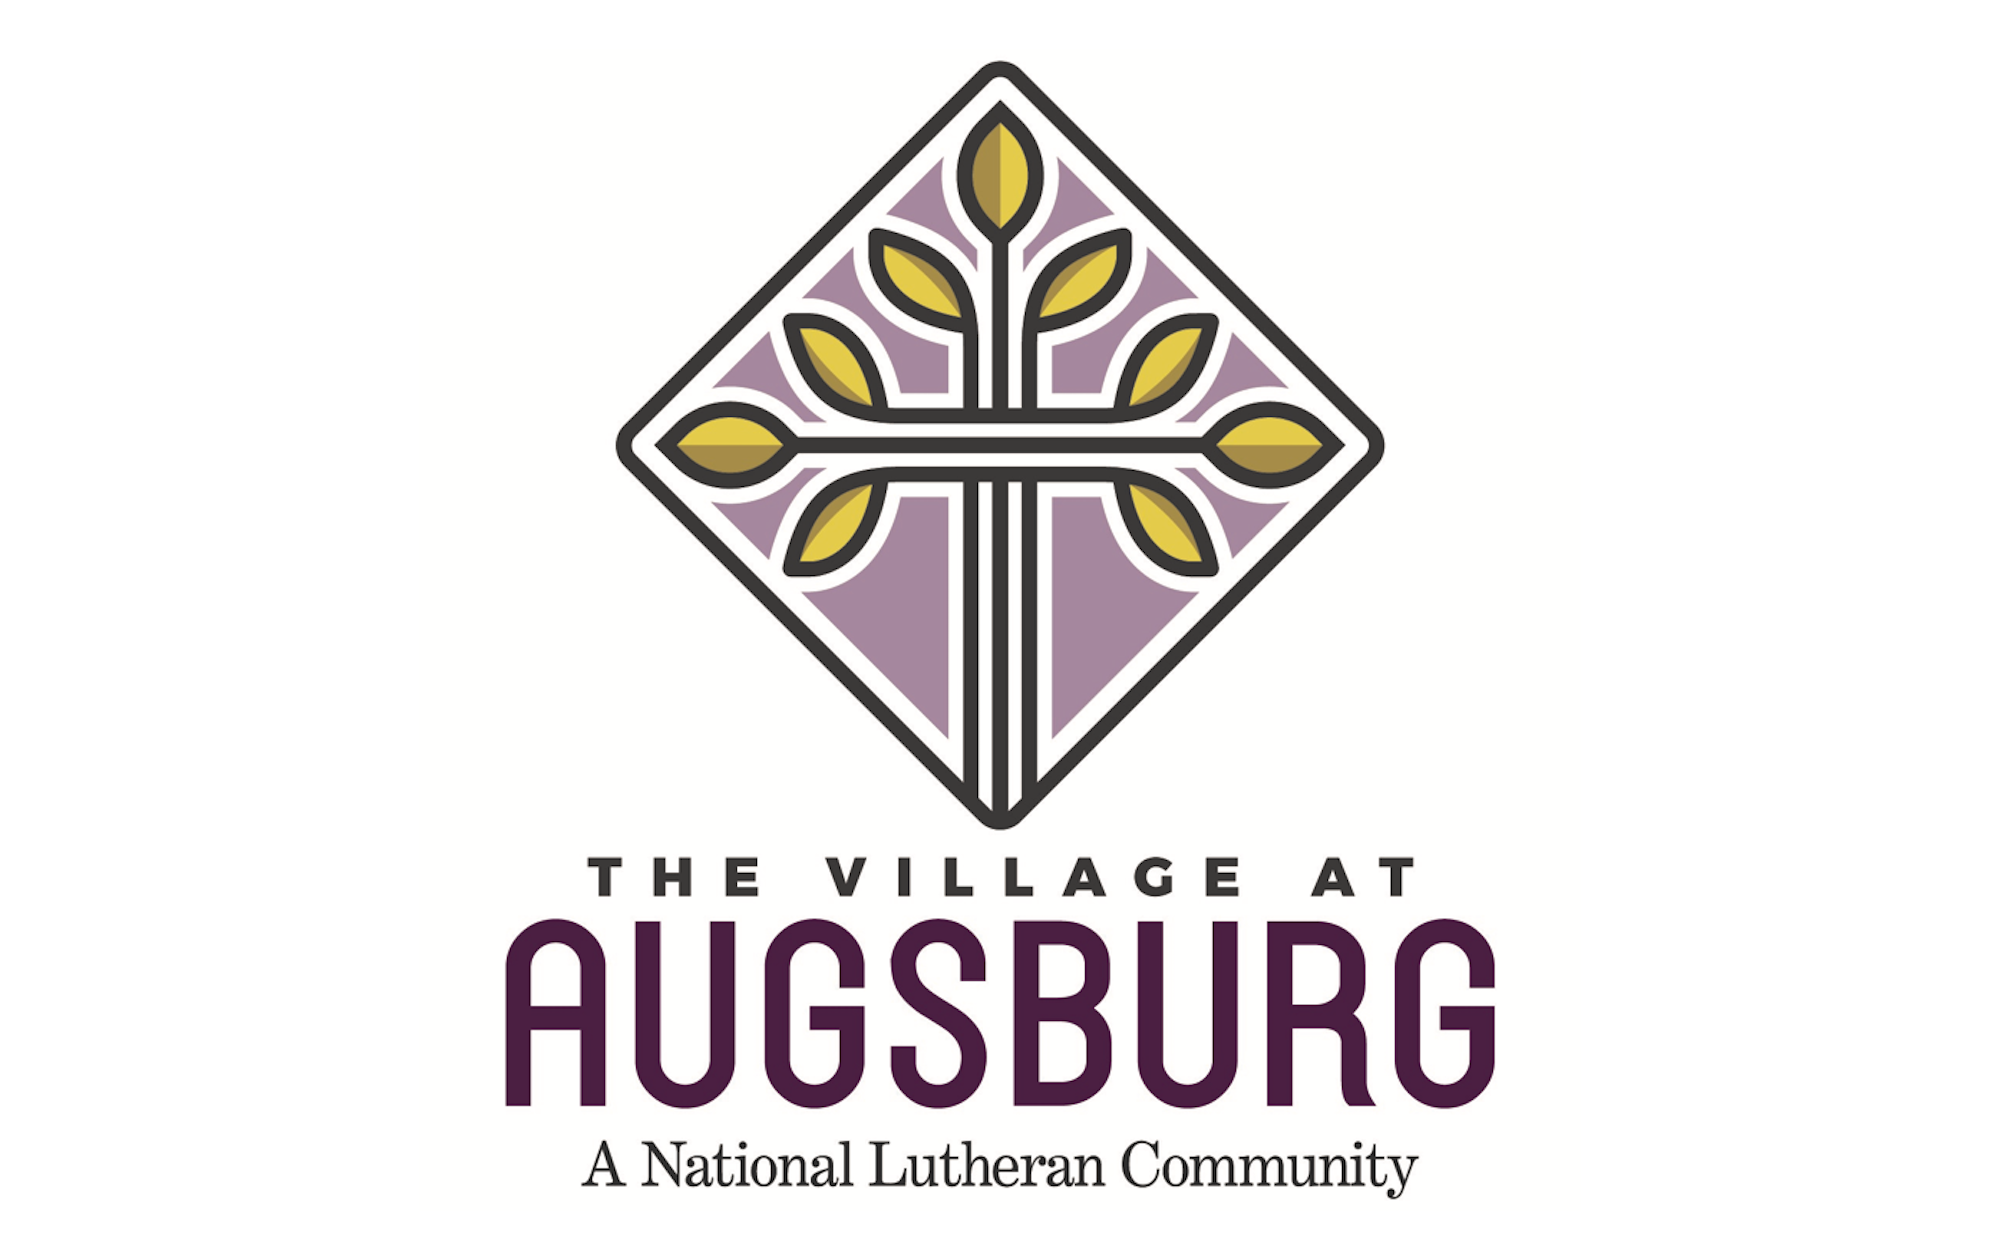 Review of Augsburg lutheran home gwynn oak md with New Ideas